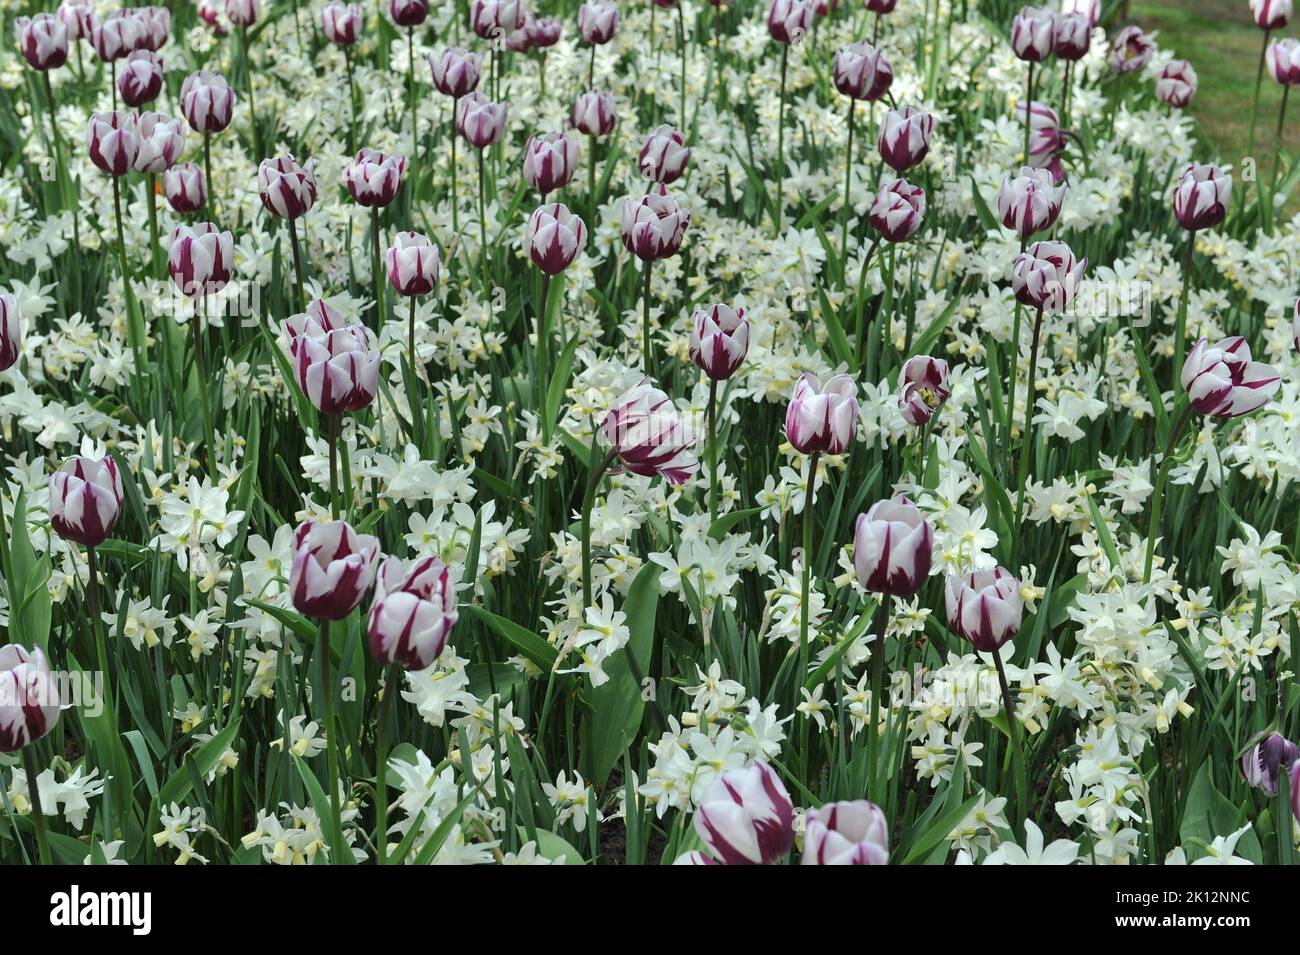 White and purple Triumph tulips (Tulipa) Rems Favourite bloom in a garden in April together with white daffodils (Narcissus) Stock Photo